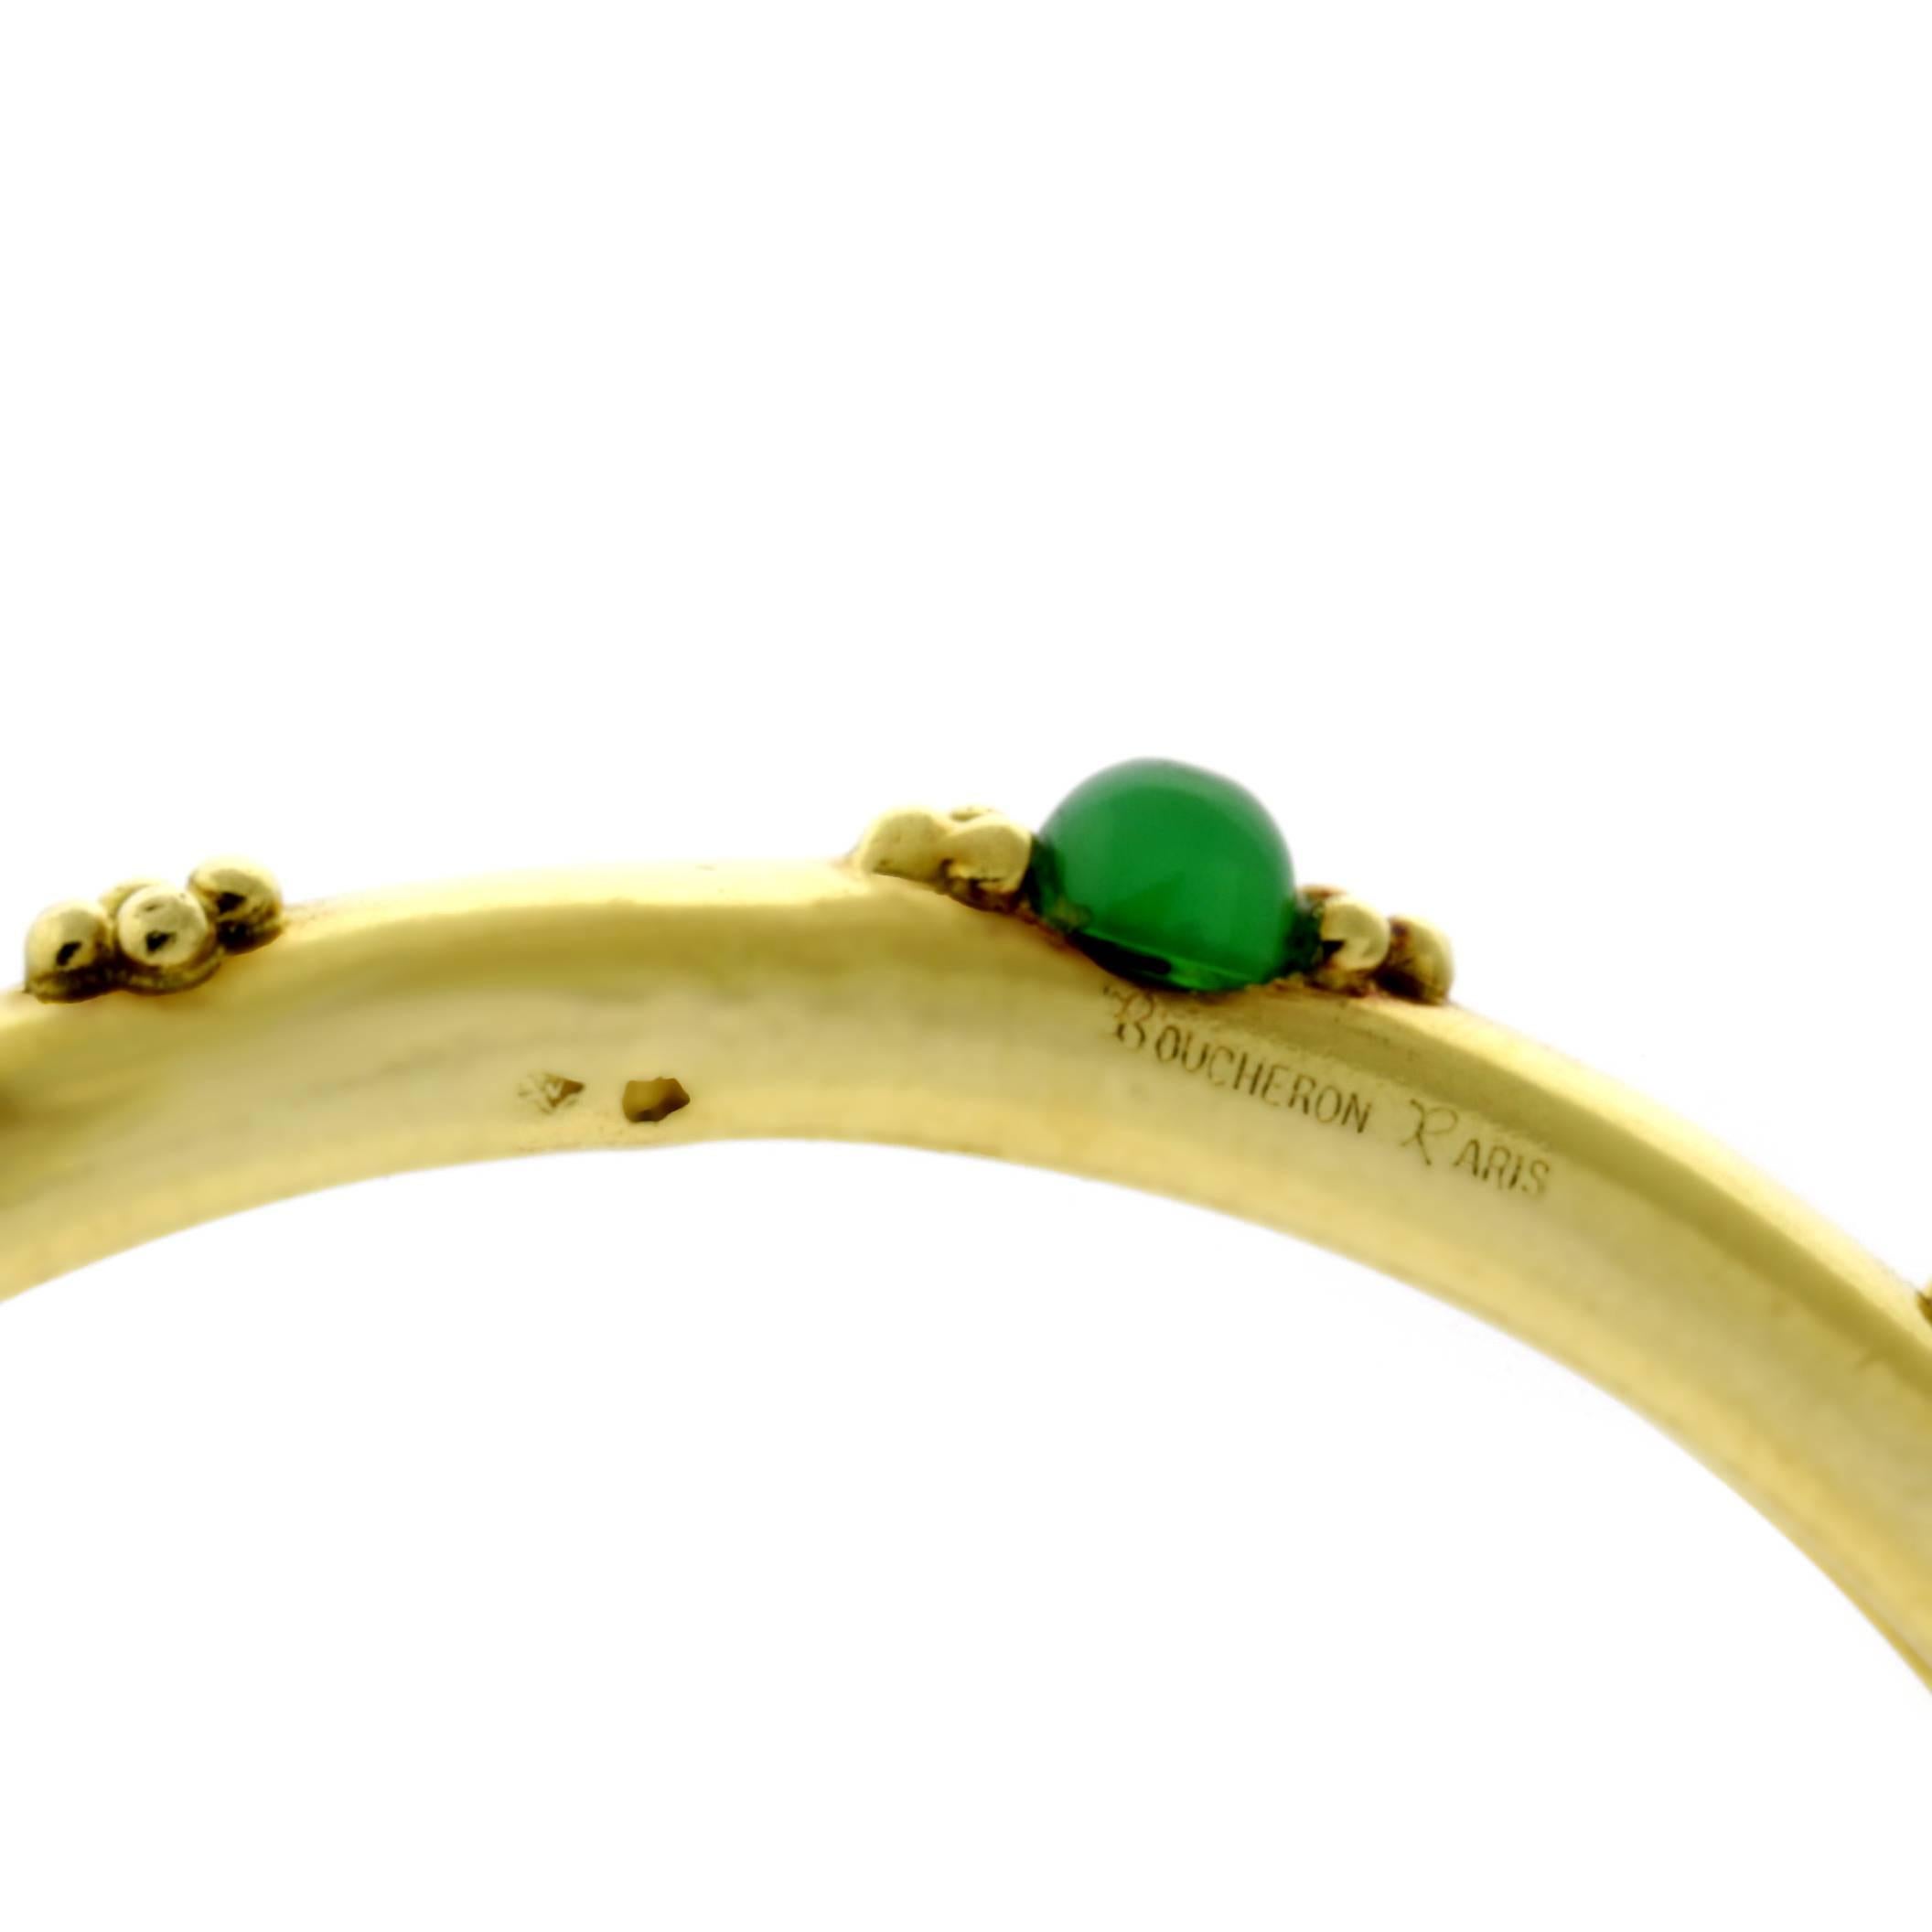 A classic 18k yellow gold bangle by Boucheron featuring 6 cabochon emeralds. The bracelets internal diameter is 2.25